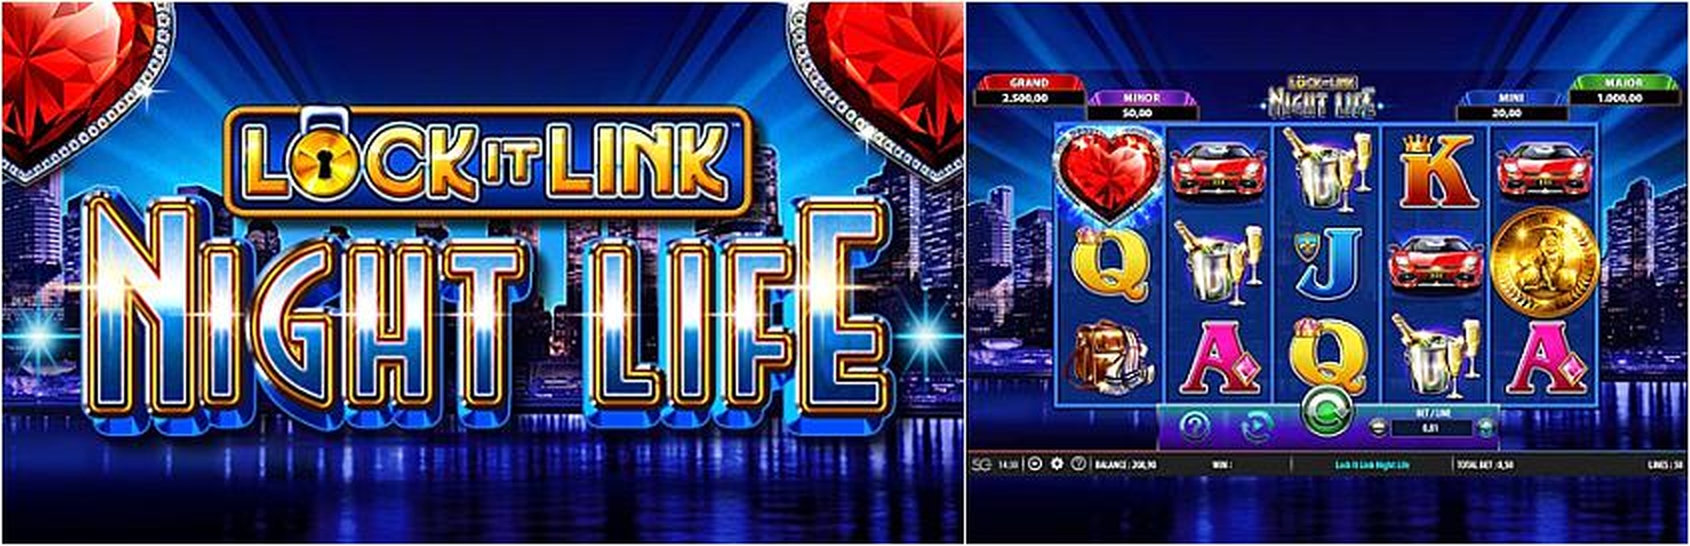 The Lock it Link Night Life Online Slot Demo Game by SG Interactive